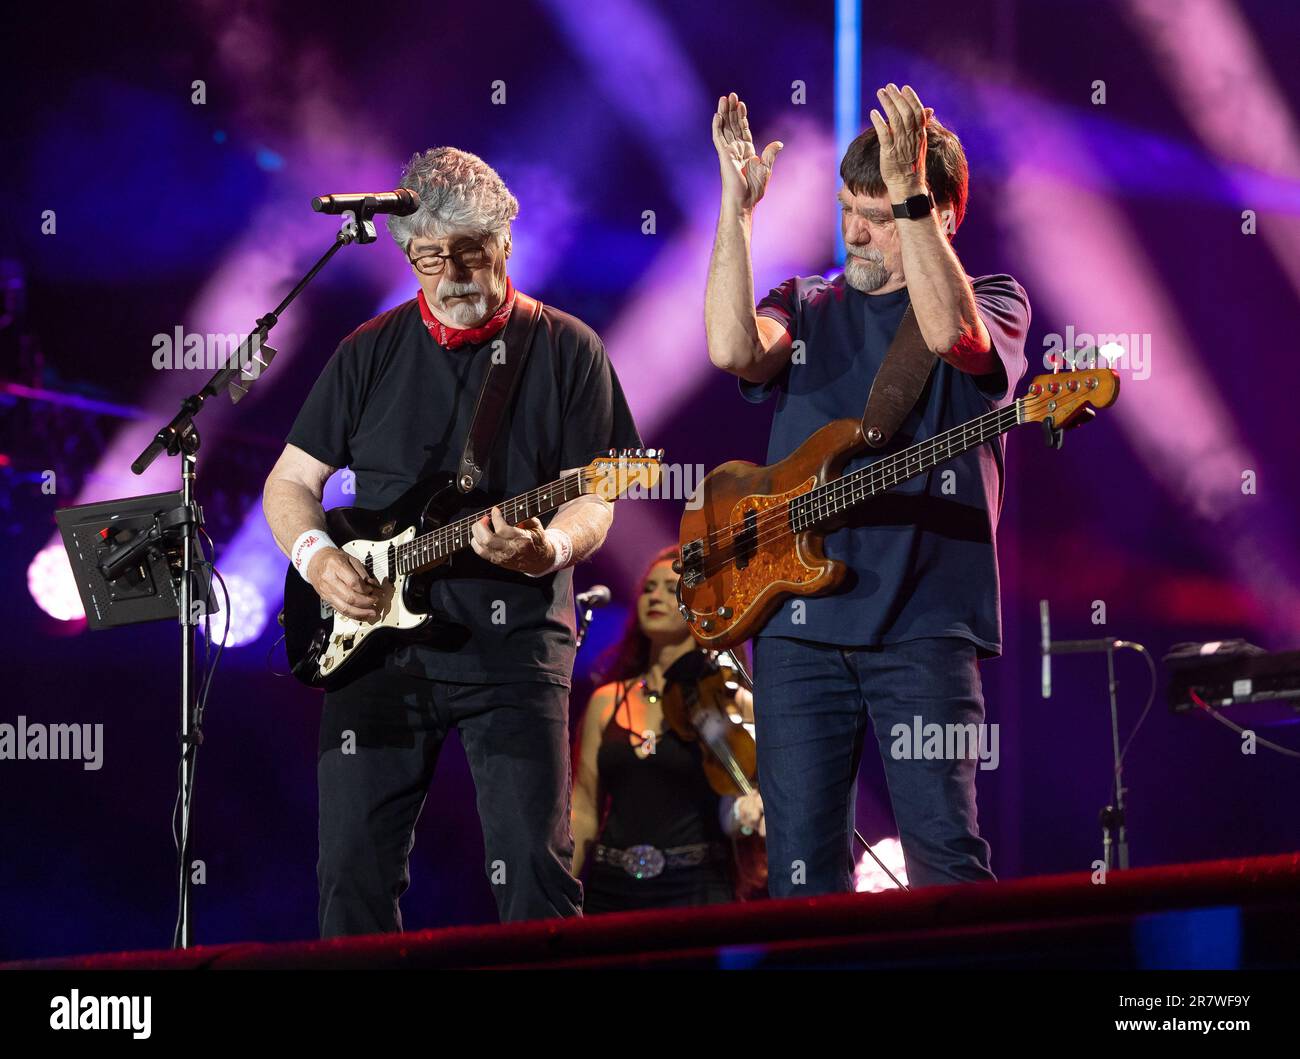 Alabama performs during day 4 of the CMA Fest at Nissan Stadium on Thursday, June 11, 2023, in Nashville, Tennessee. (Photo by: Amiee Stubbs/imageSPAC Stock Photo